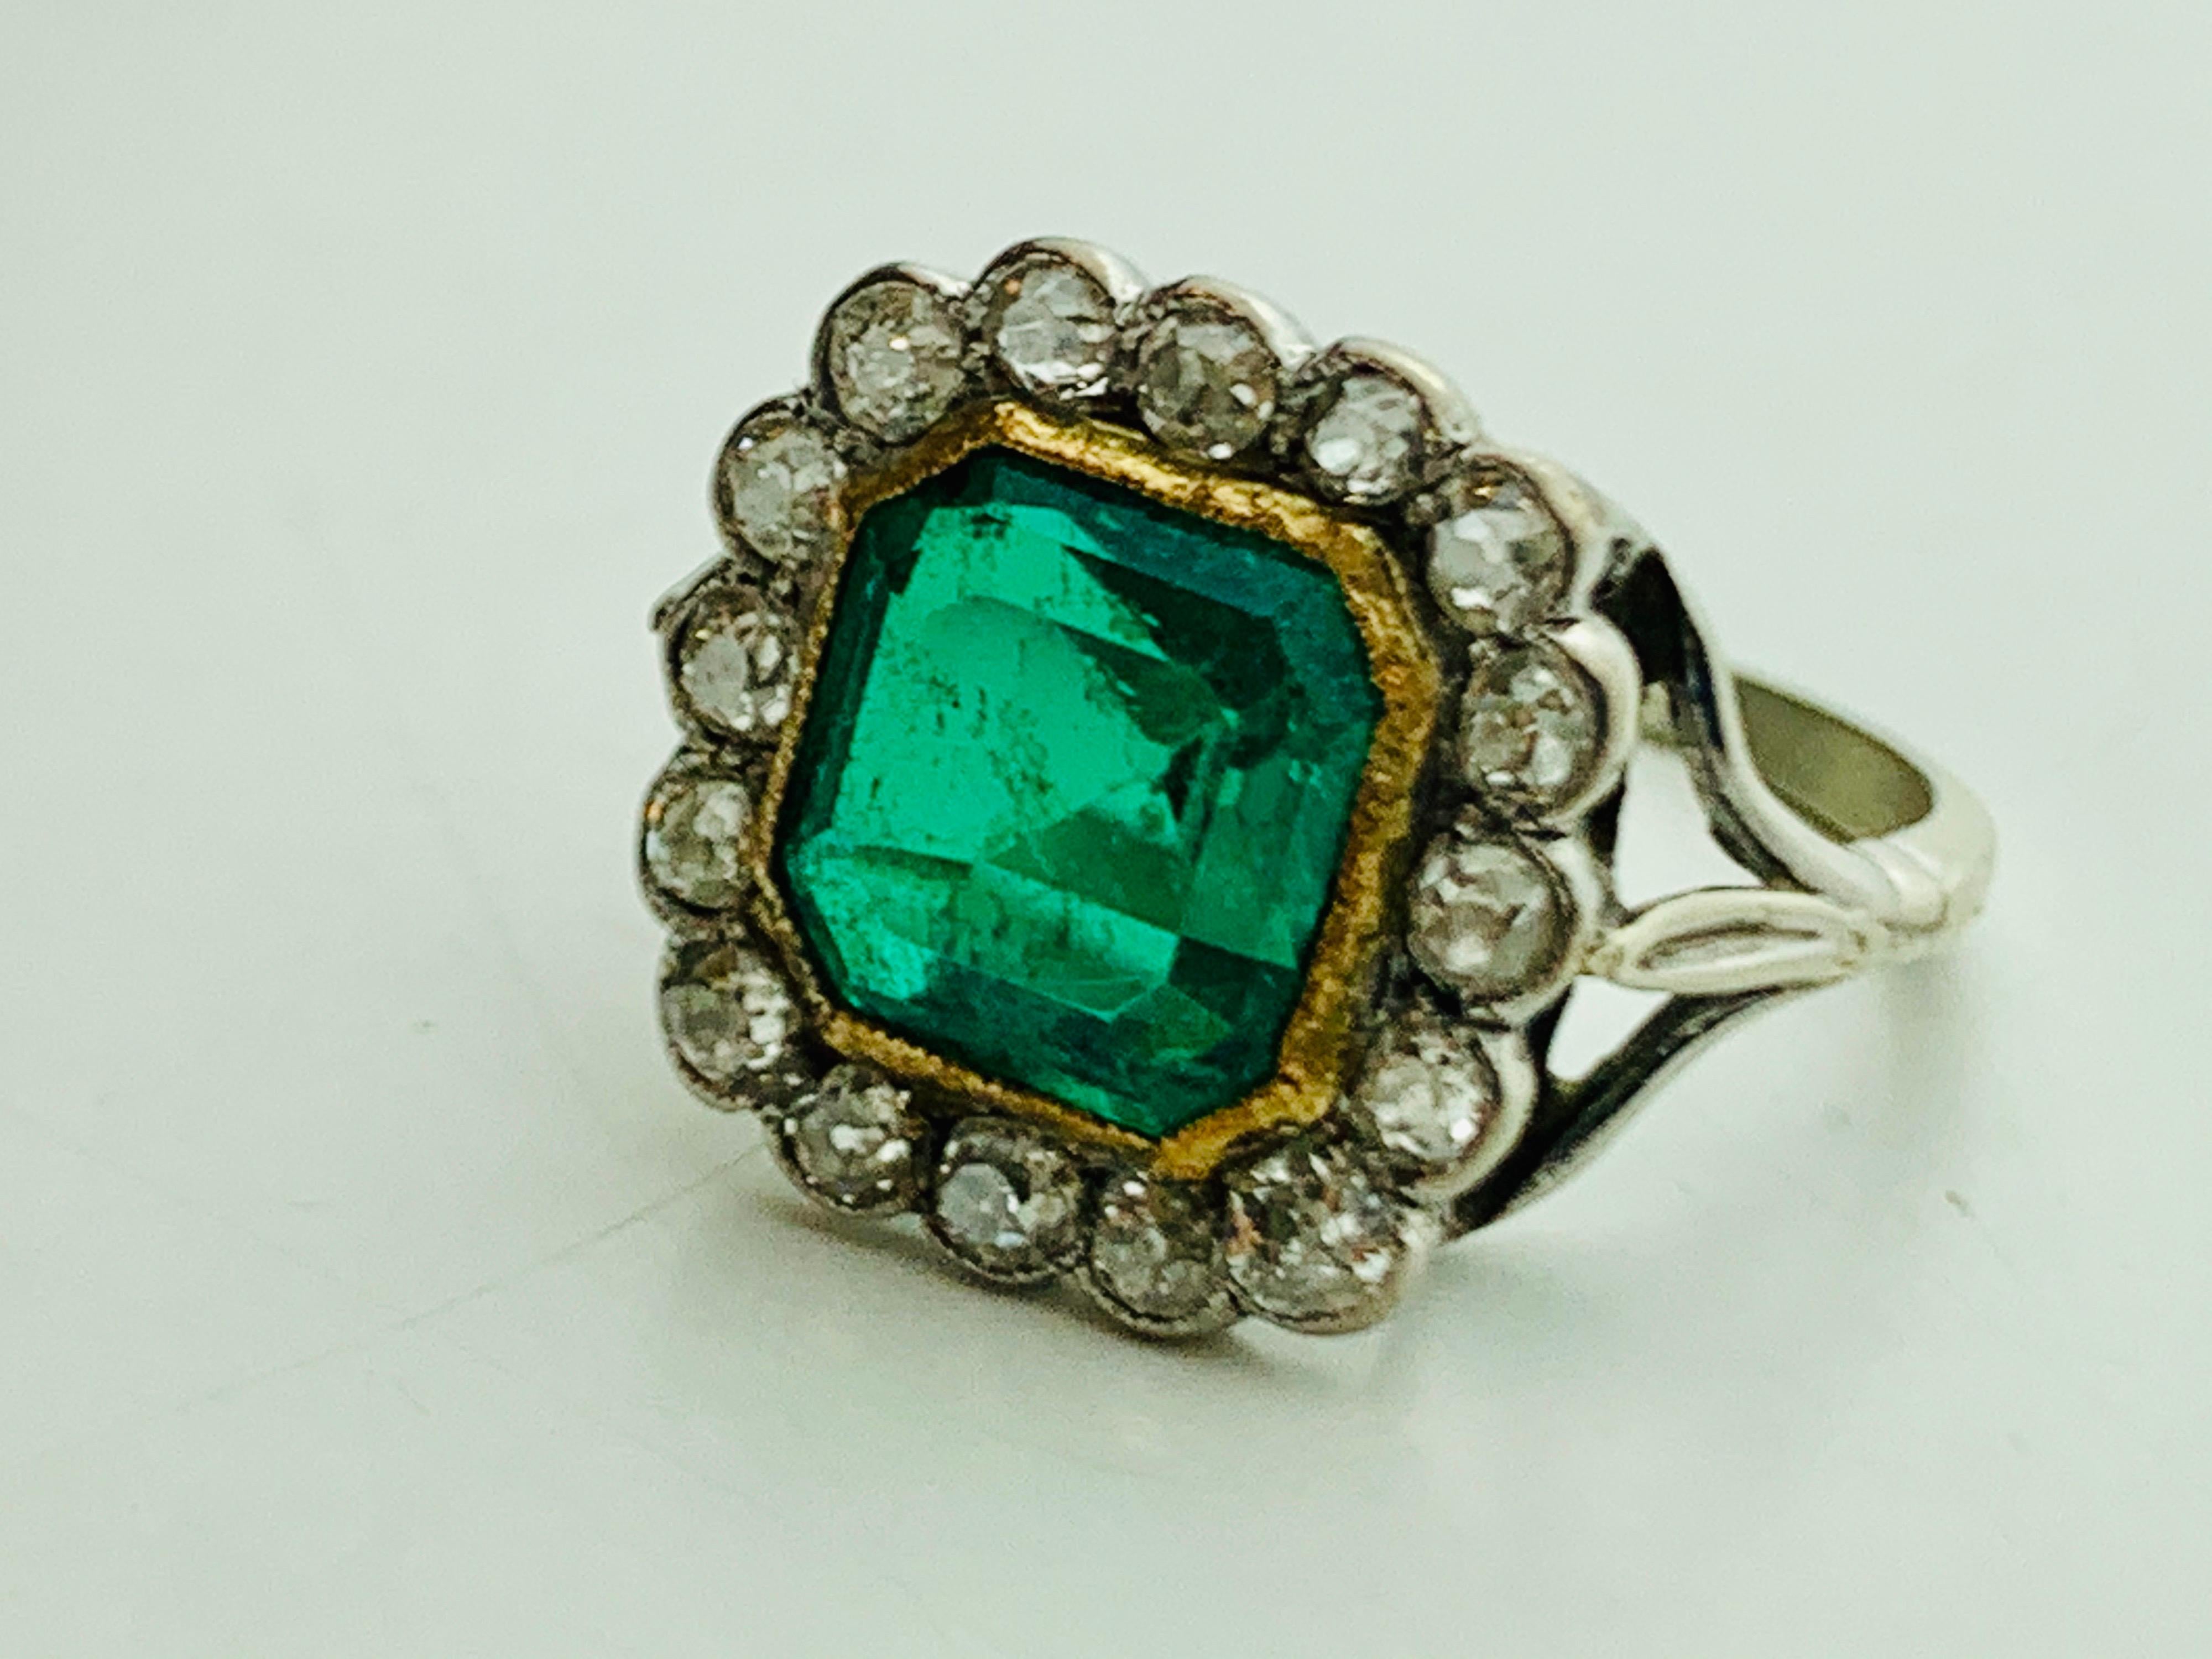 Antique 18 Karat White Gold Coktail Ring With A Large Quality 3 Carat Green Zambian Emerald & Brilliant Old Cut White Cut Pavé Set Diamonds Approximately 1 Carat. Period Circa 1940. English. Original Condition And Will Be Polished Prior to Sending.